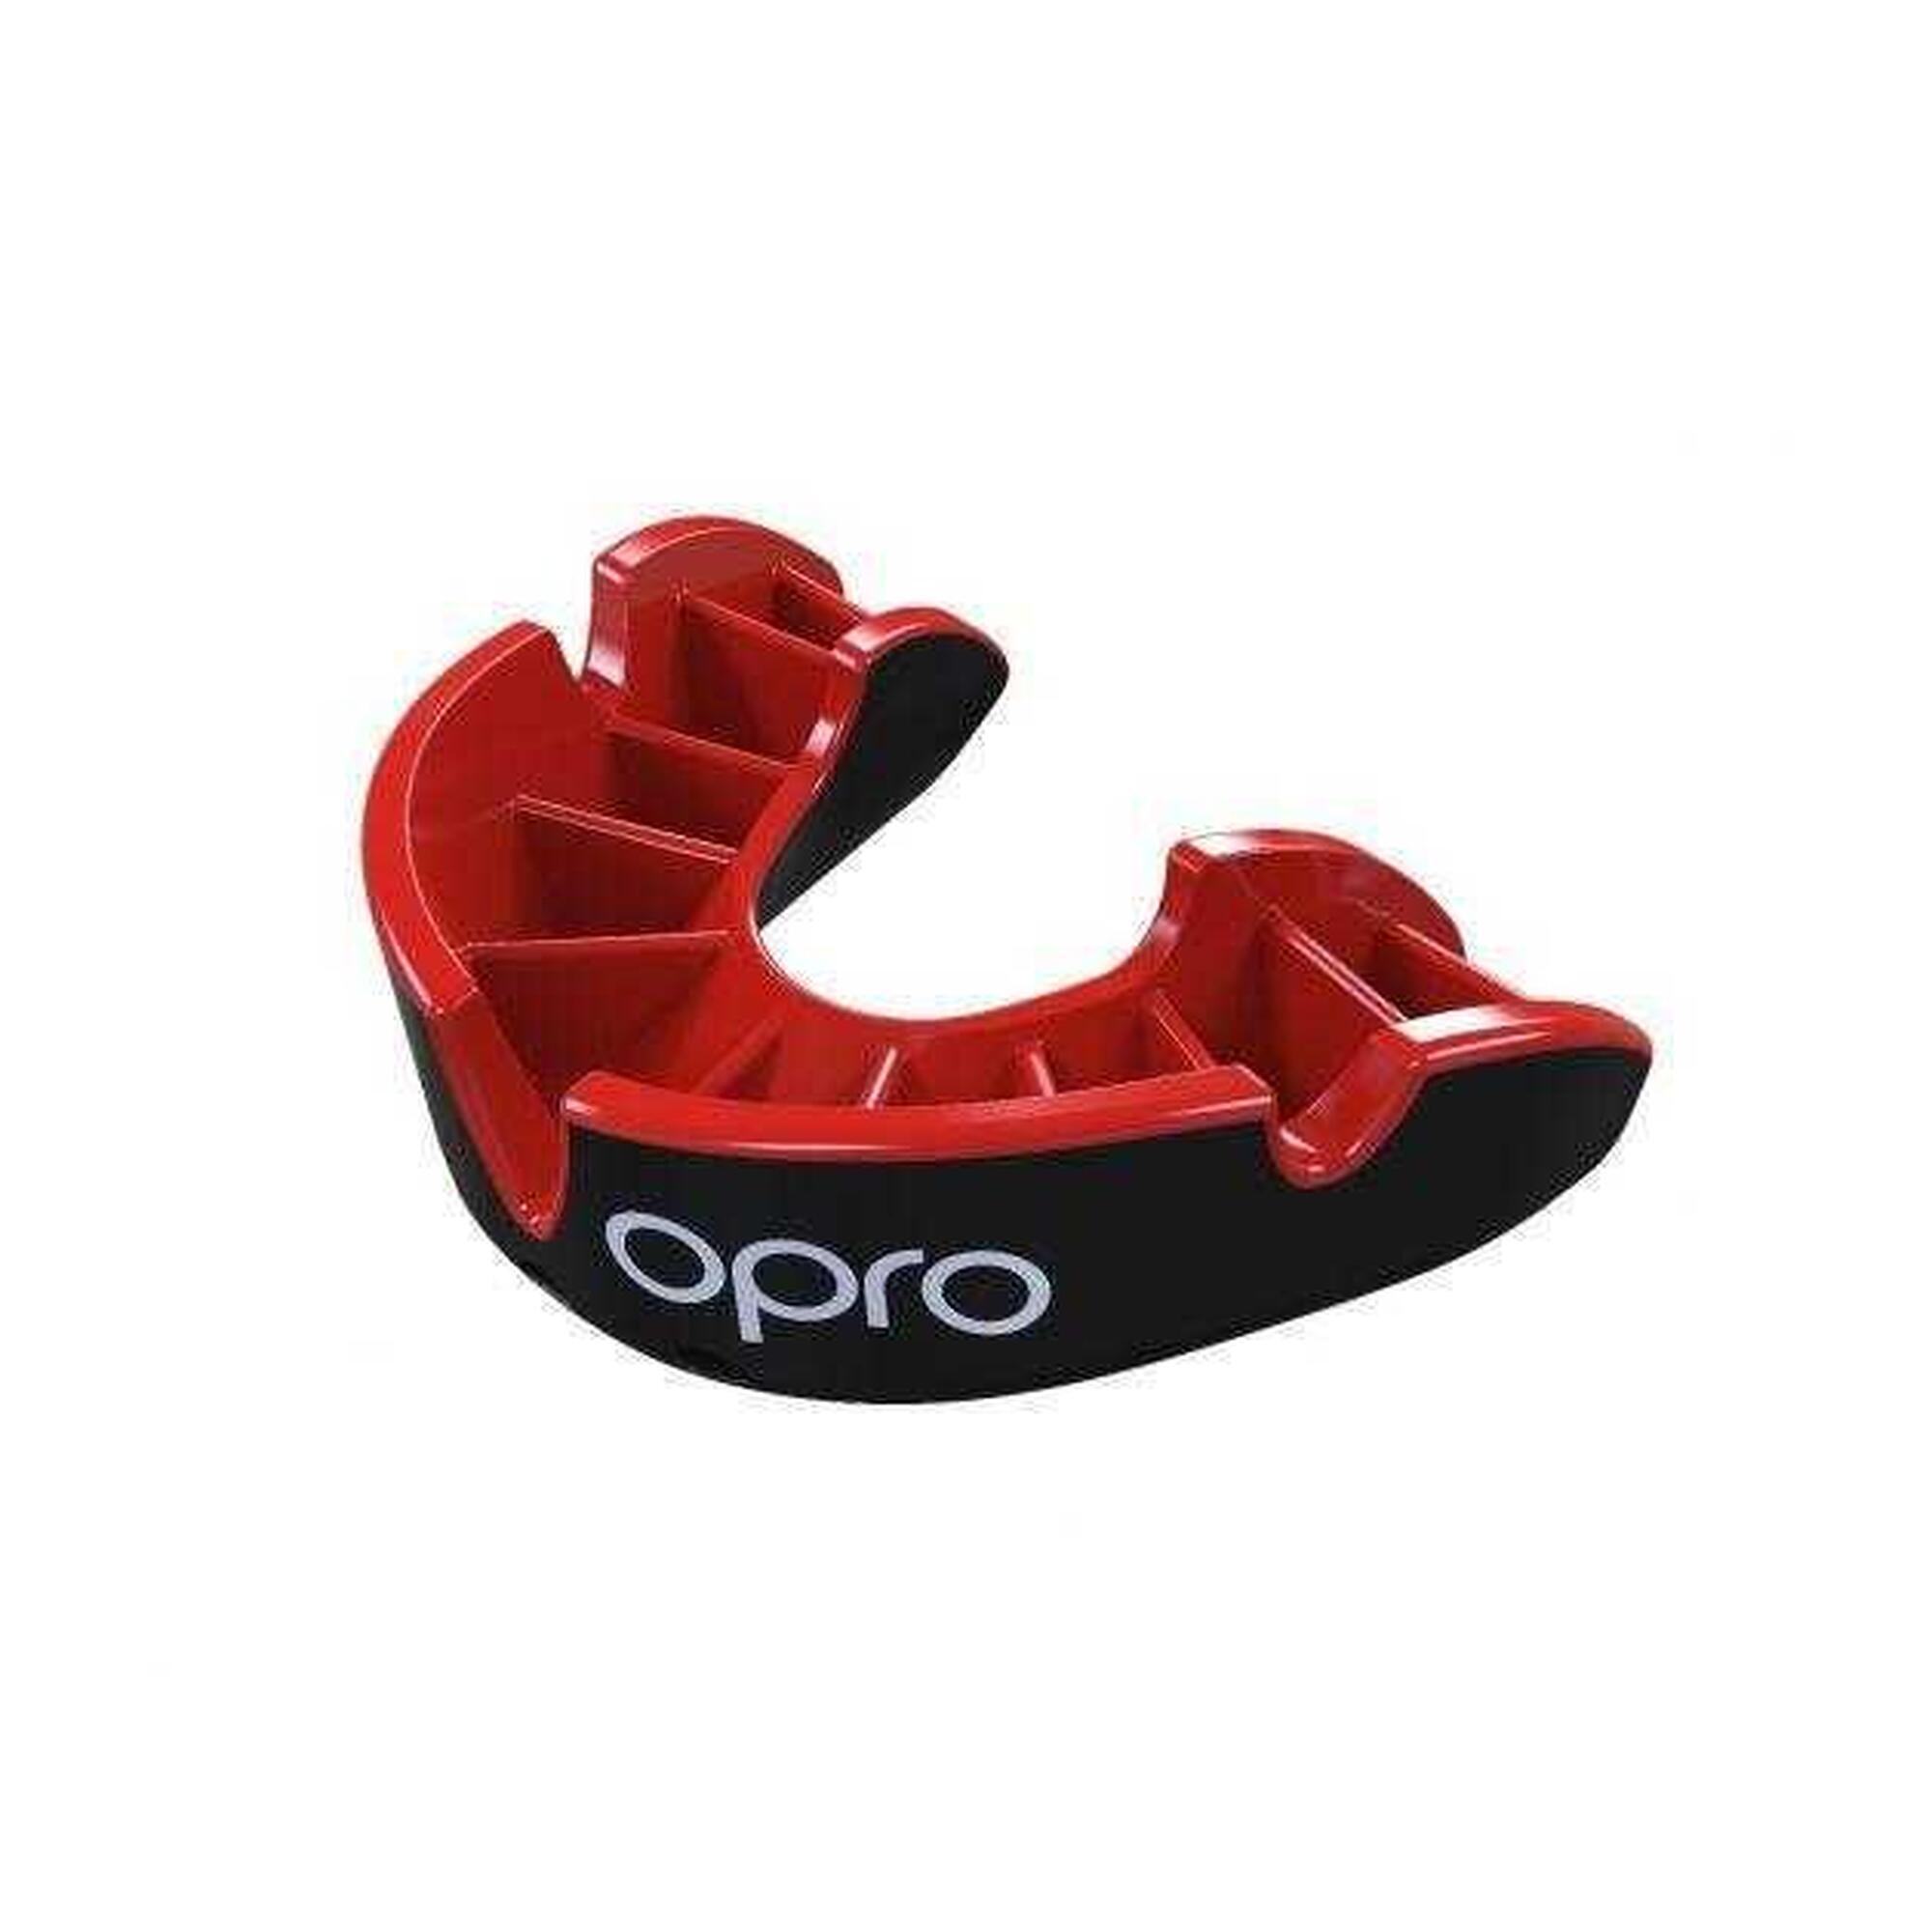 Adult Silver Level Mouth Guard (Age 10 to Adult) - Red/Blue